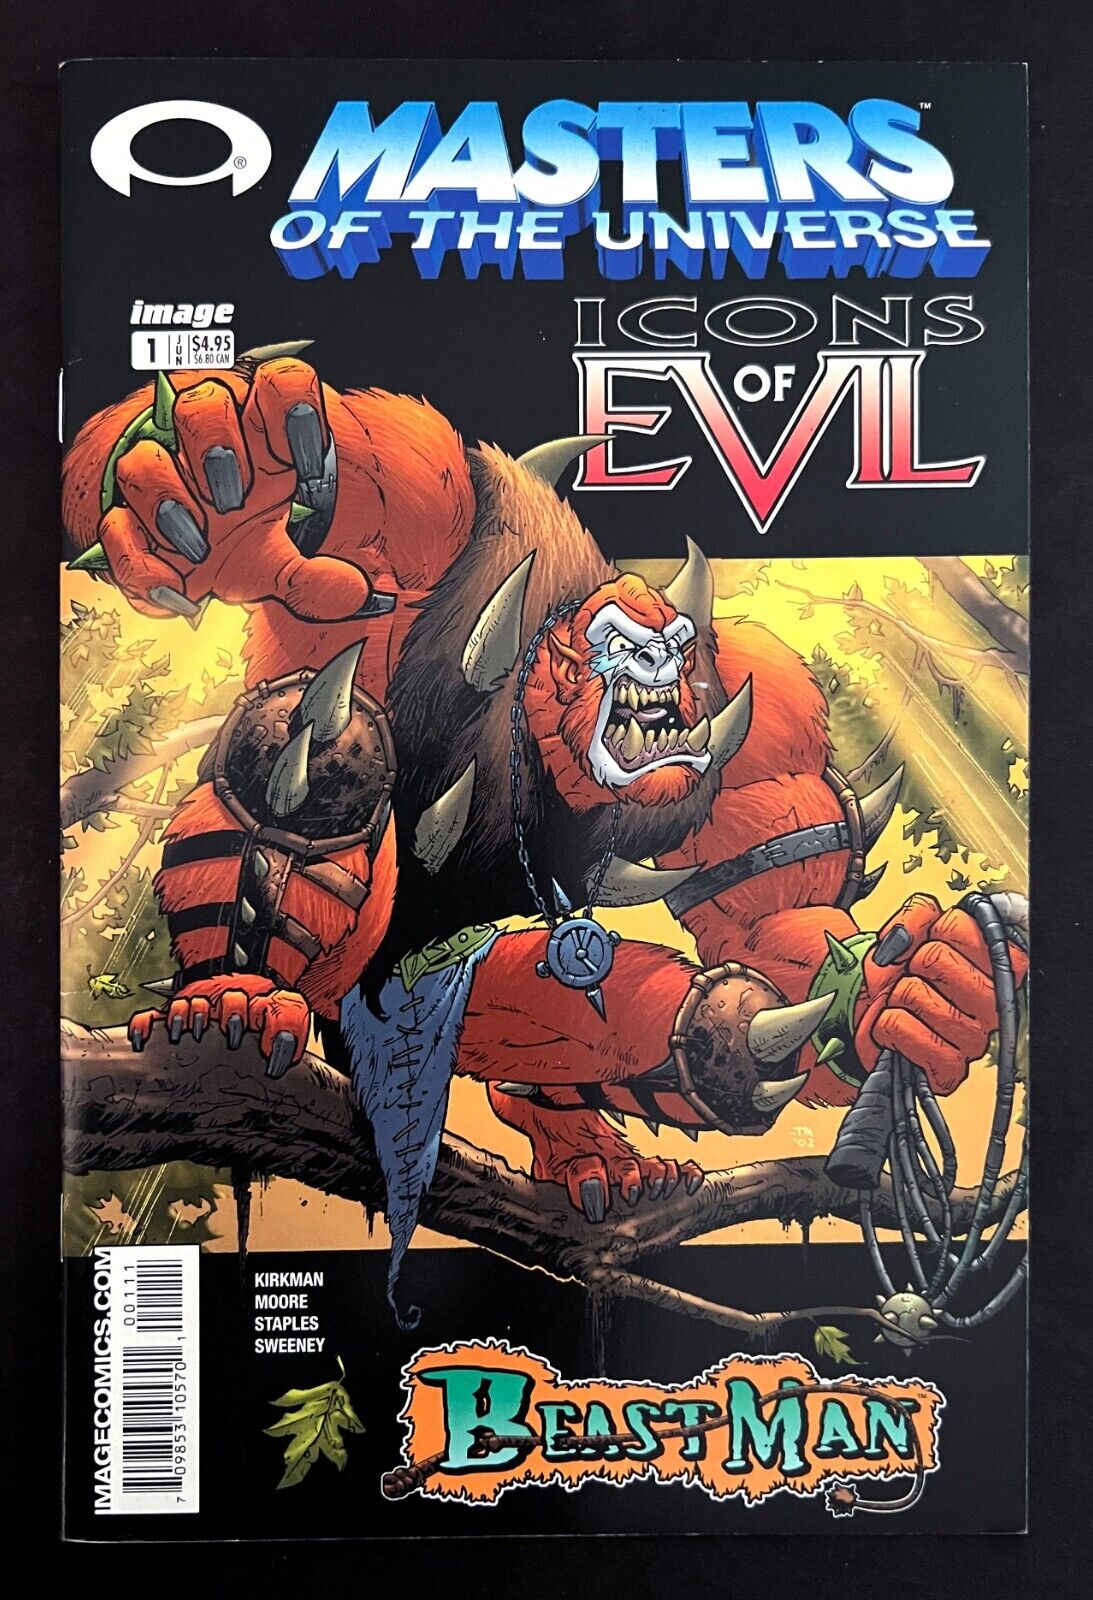 MASTERS OF THE UNIVERSE: ICONS OF EVIL BEAST MAN #1 HE-MAN Kirkman Image 2003